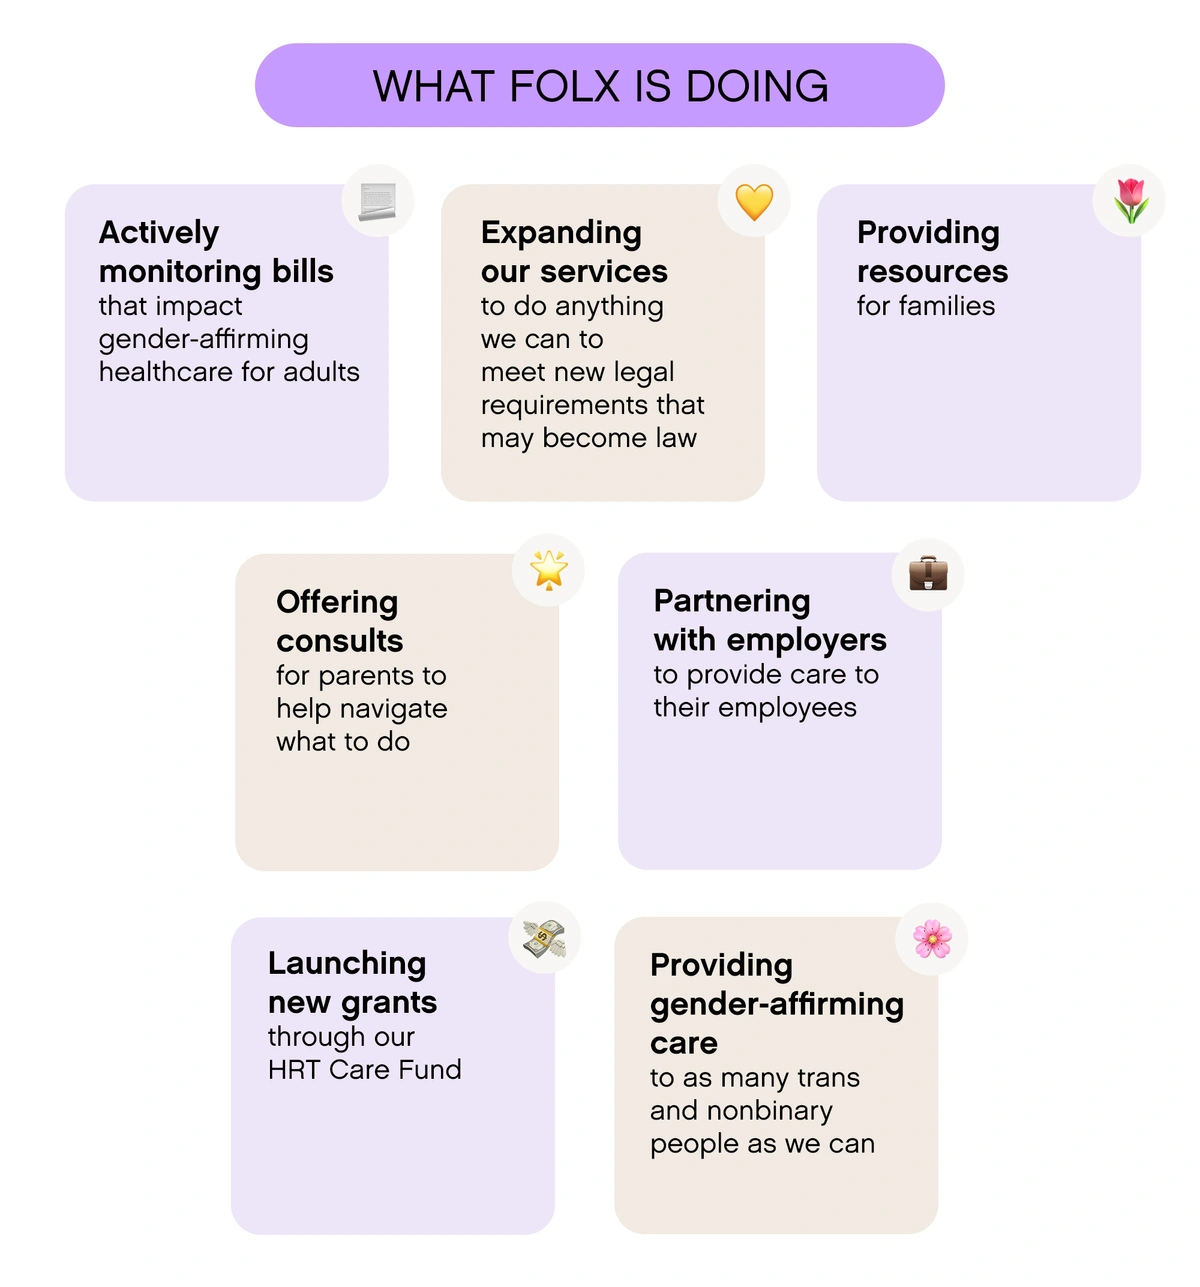 Infographic displaying FOLX's advocacy to support gender-affirming health care. From "What FOLX is doing" section of the article.